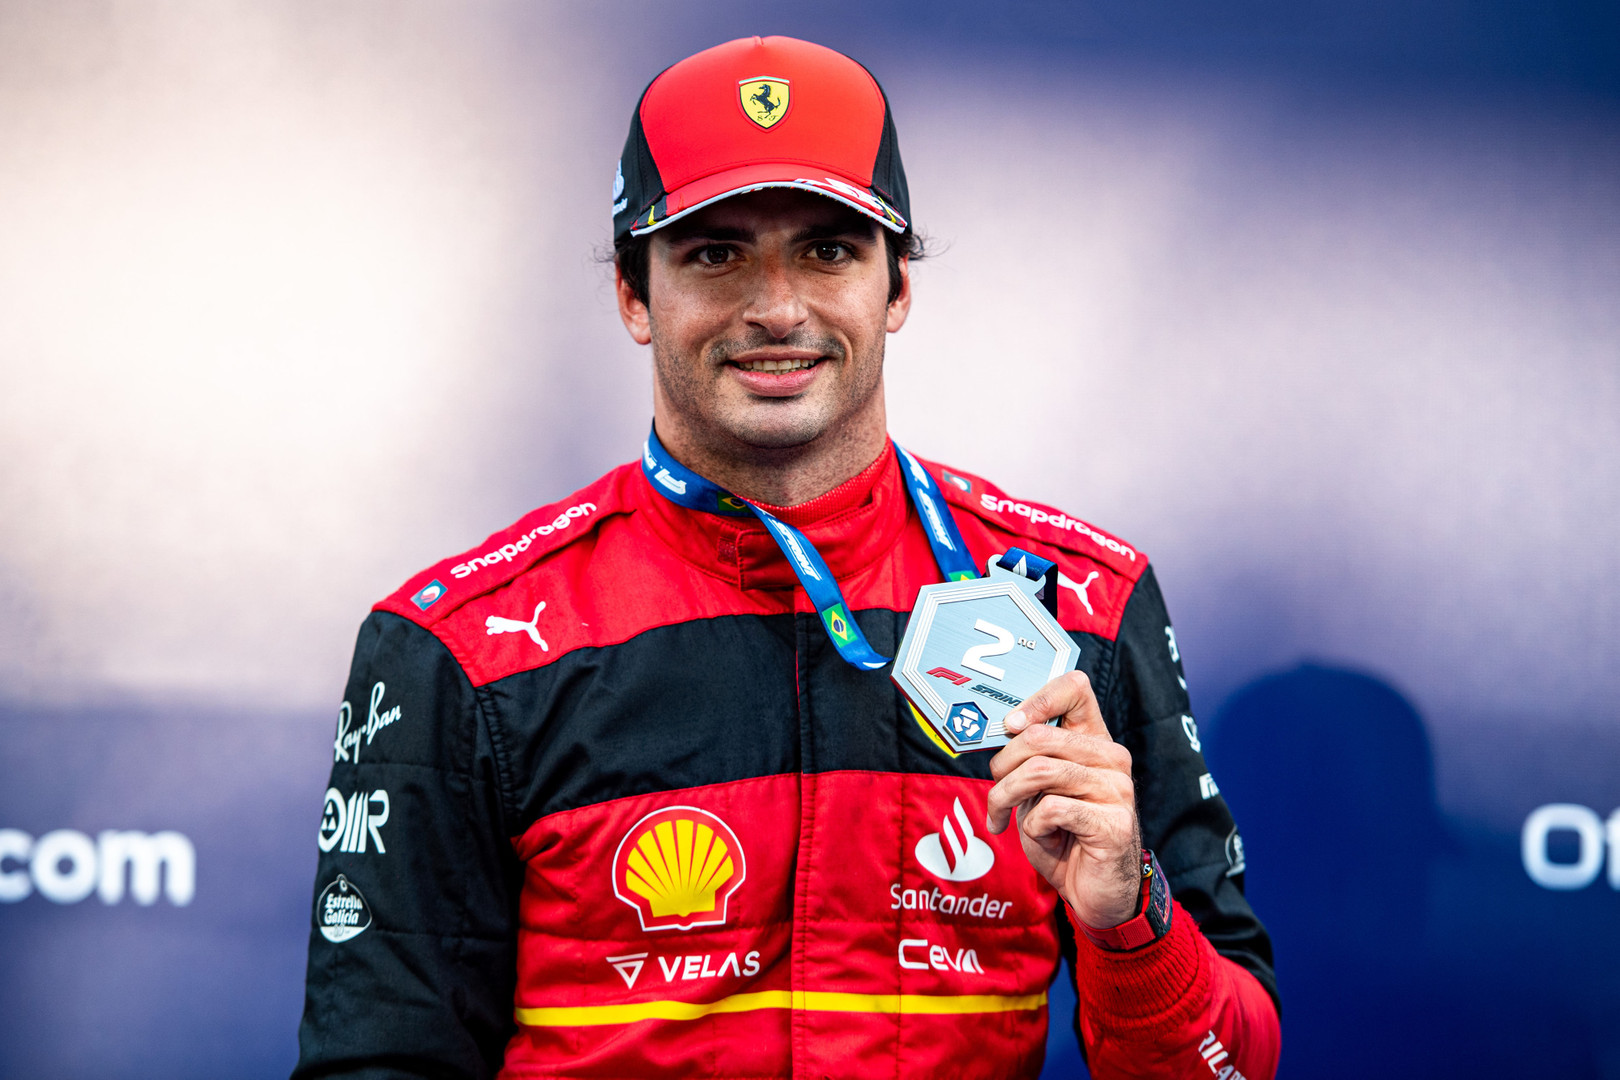 Photos and video: Carlos Sainz with his P2 medal after 2022 Brazil ...